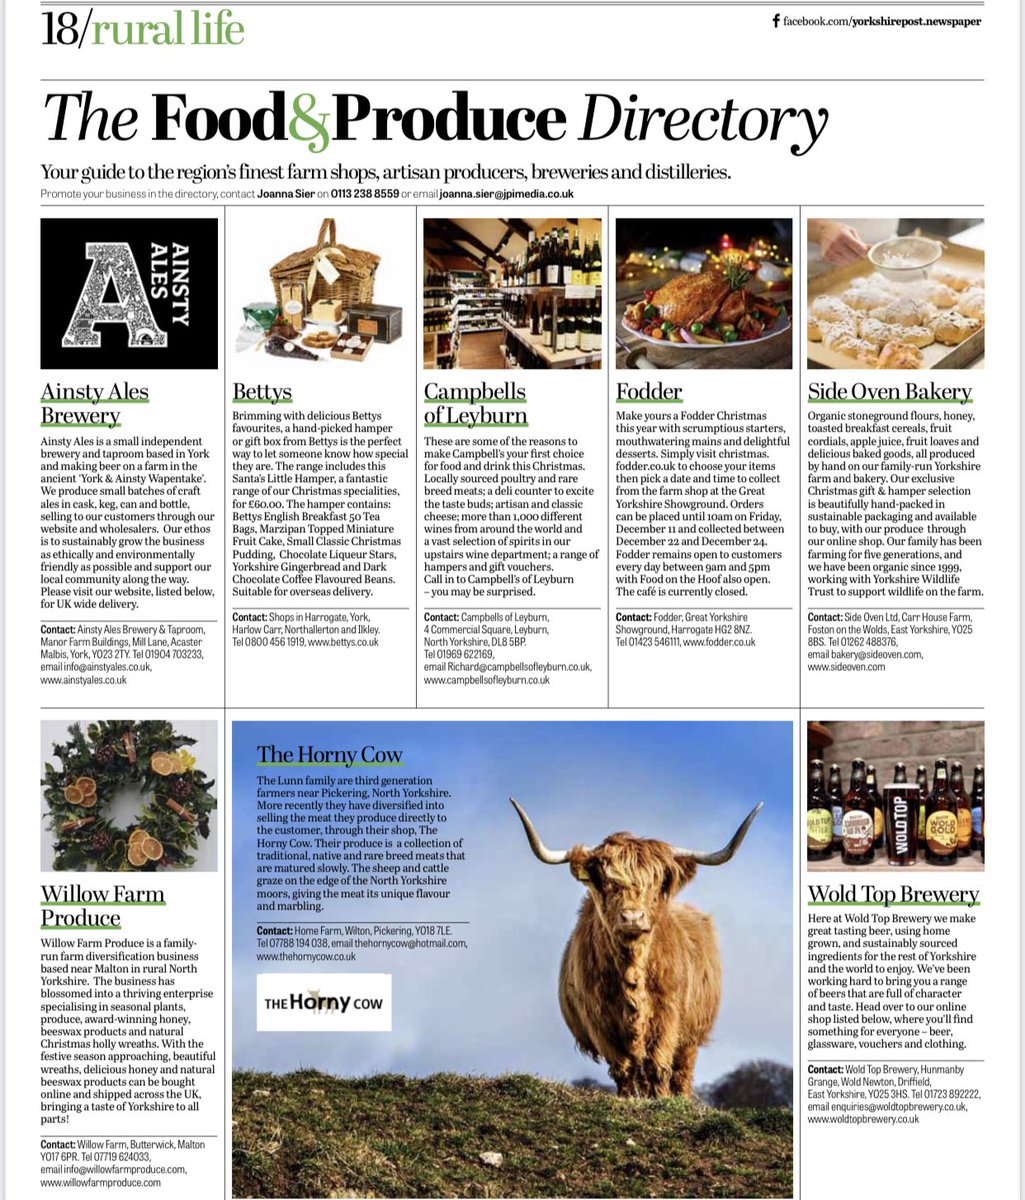 Our new food&drink directory in today’s Countryweek in  @yorkshirepost showcasing 

@AinstyAles @Bettys @Campbells1868 @FodderHarrogate @SideOven @woldtopbrewery  The Horny Cow and Willow Farm Produce 

Yorkshire produce for Yorkshire people  #buyapaper #YORKSHIRE